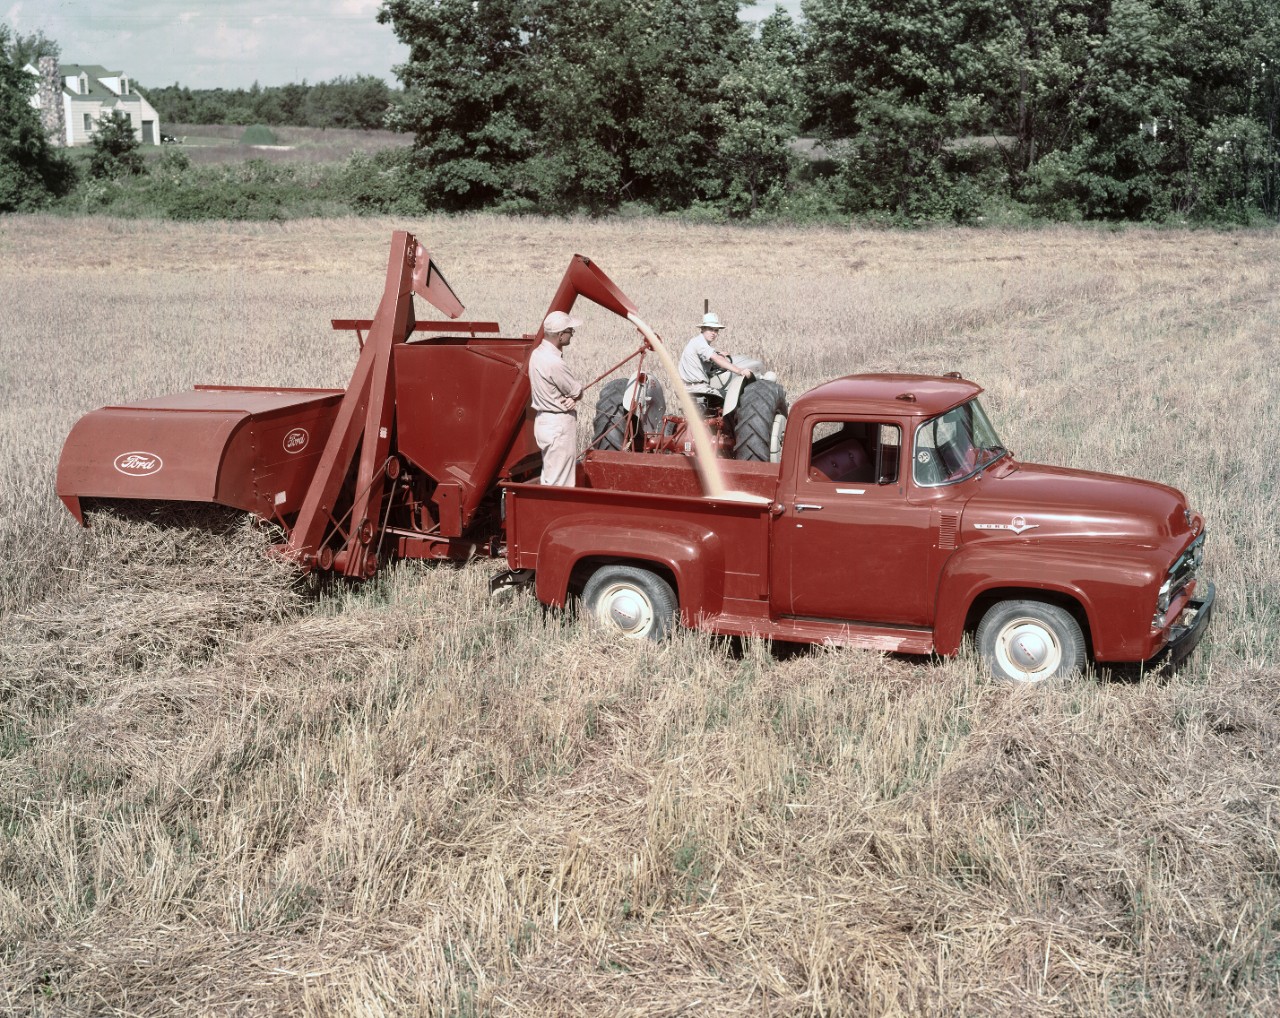 1956 Ford F-100 Truck with tractor and combine